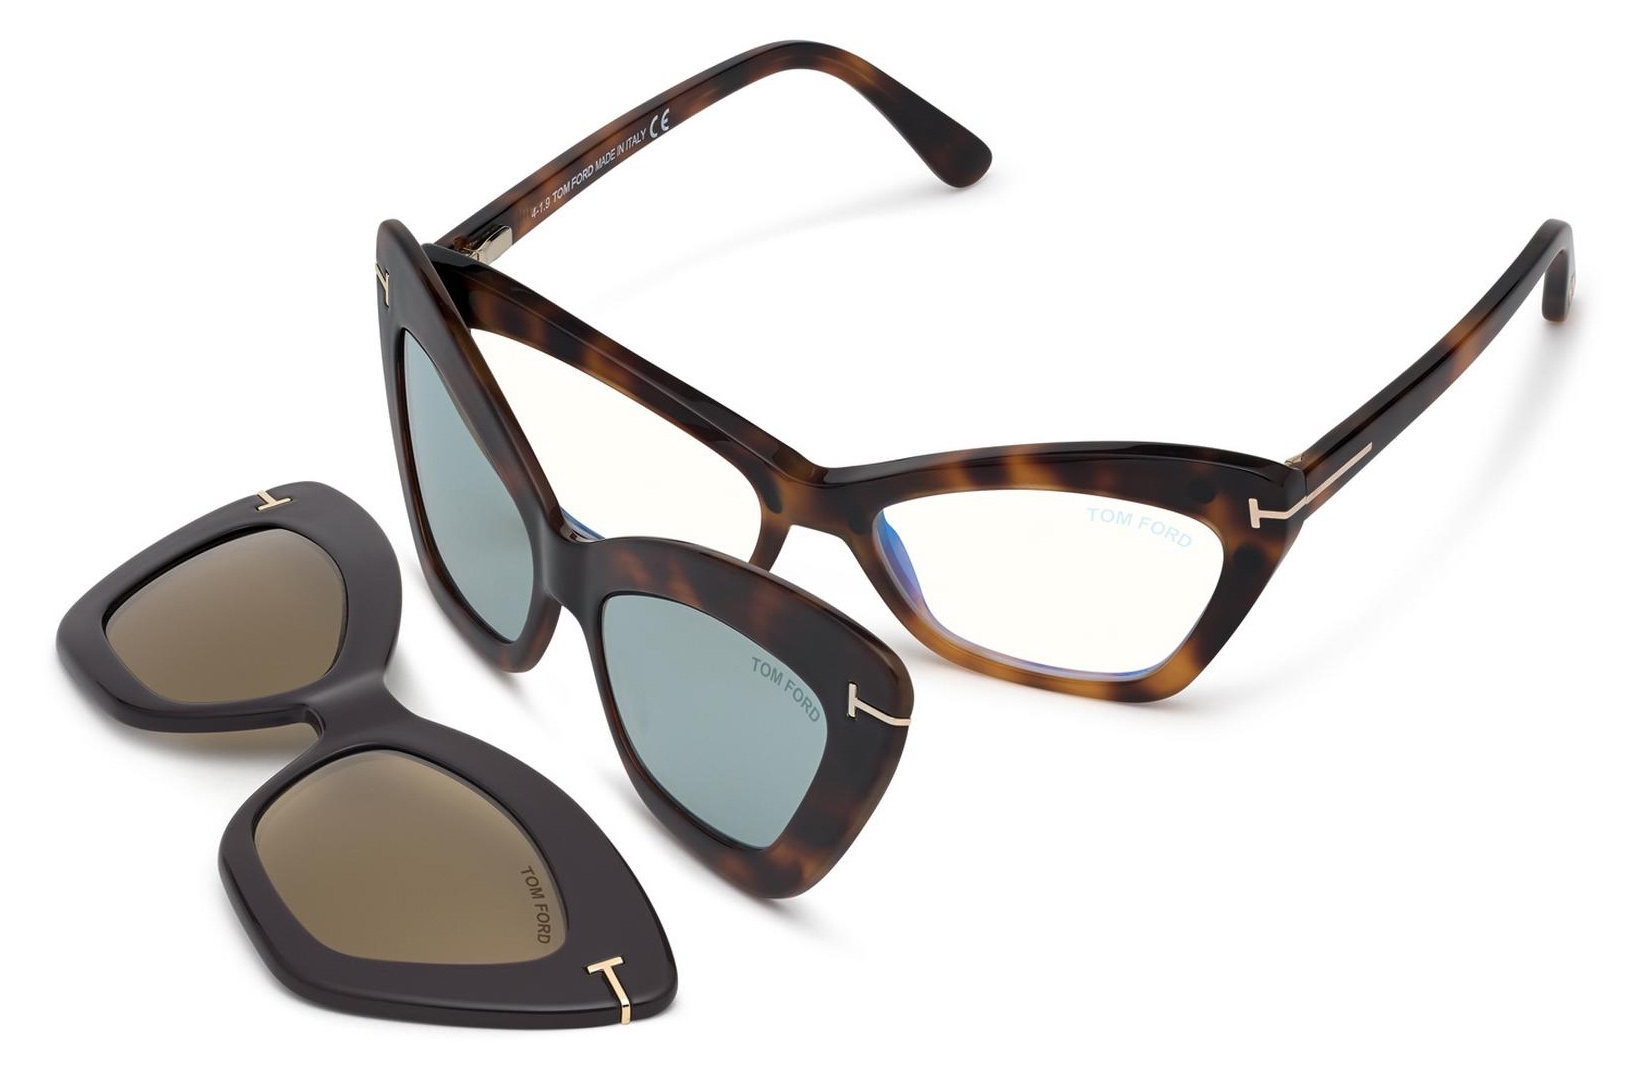 Tom Ford - Double Clip On Optical Glasses - Butterfly Optical Glasses -  Havana - FT5643-B - Optical Glasses - Tom Ford Eyewear - Avvenice